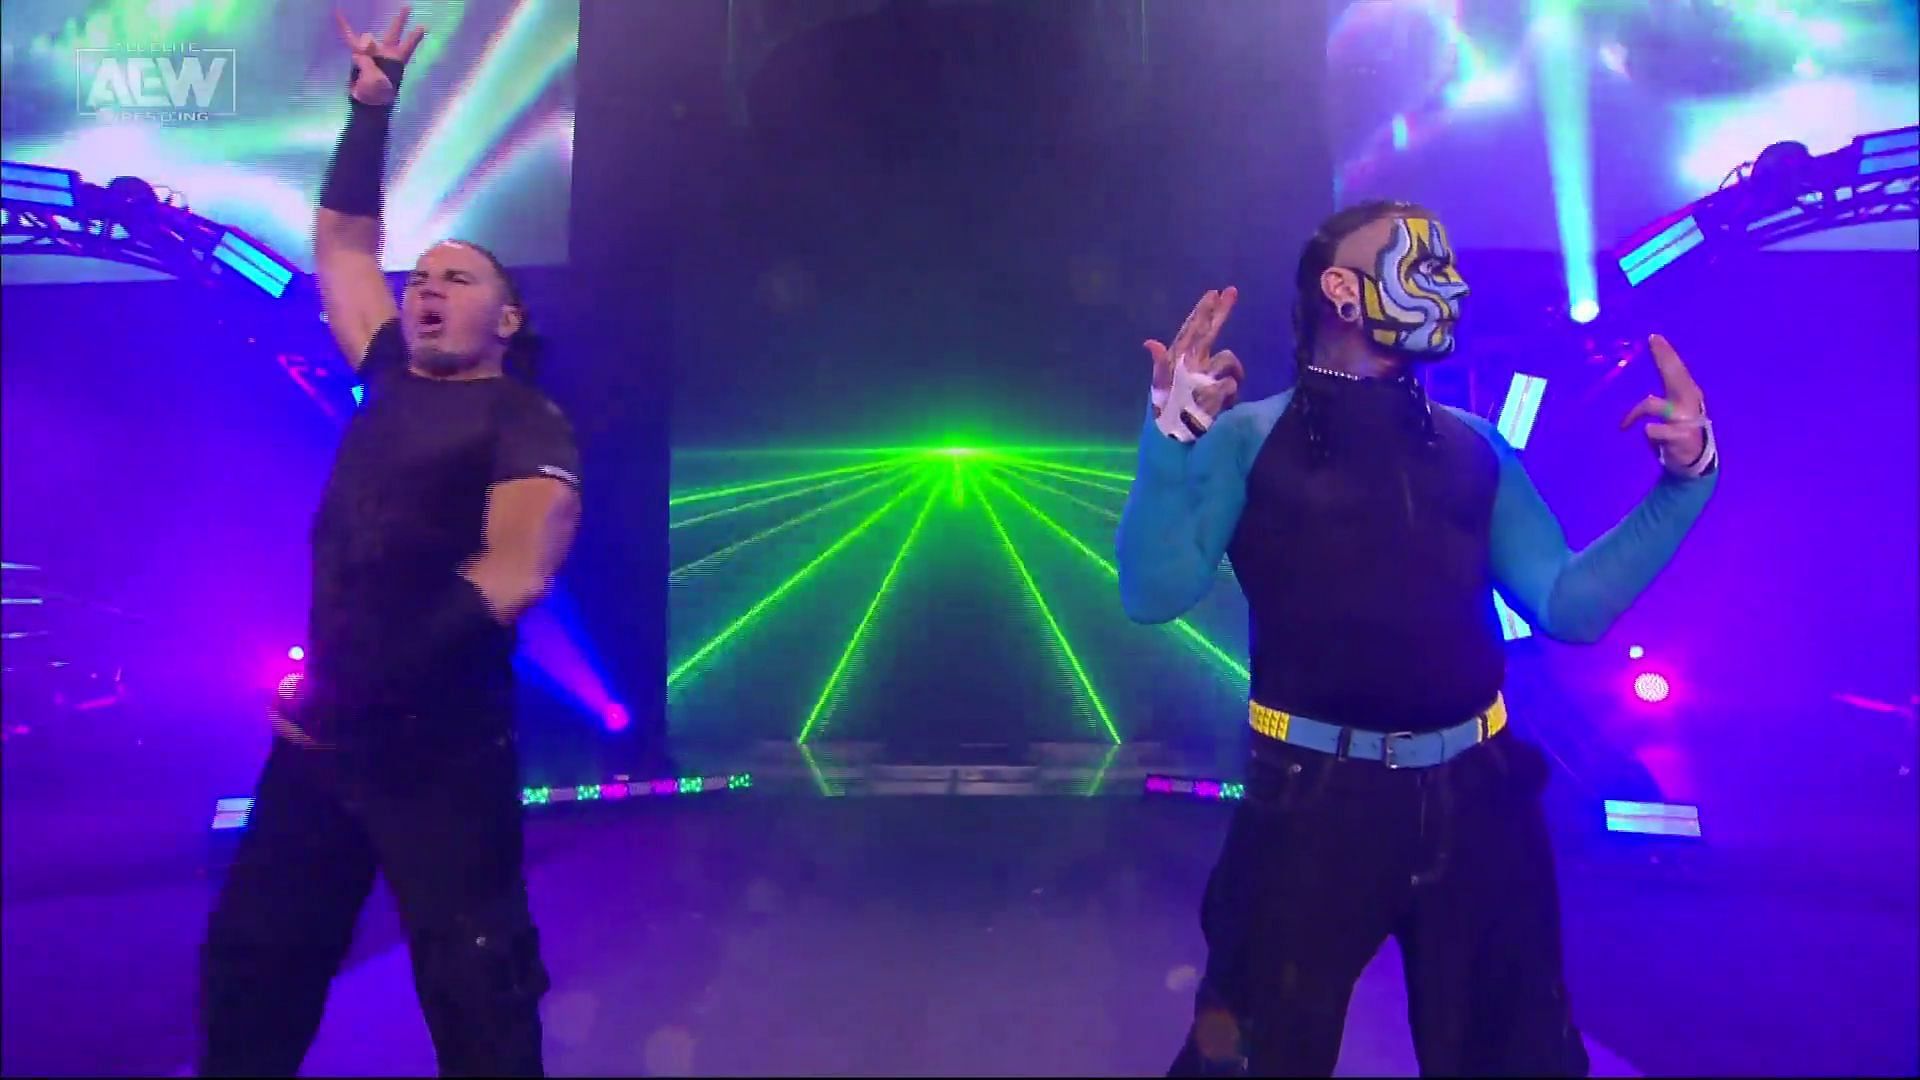 Matt and Jeff Hardy made their in-ring return this past Wednesday.